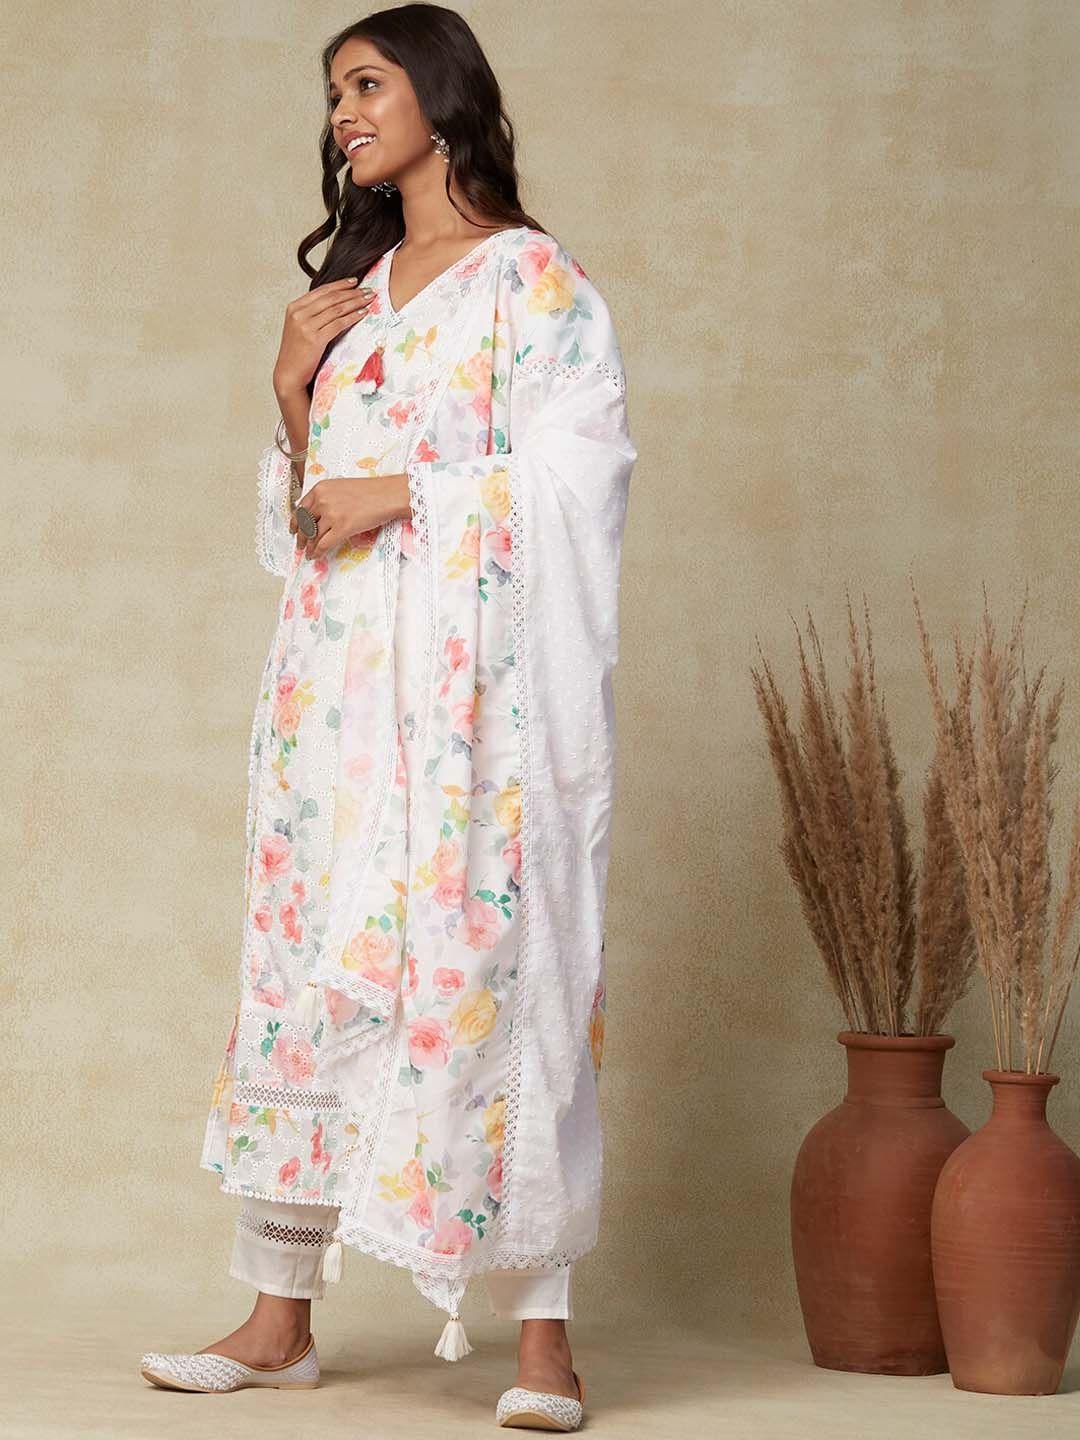 fashor white floral printed v-neck lace detailed pure cotton kurta & trousers with dupatta